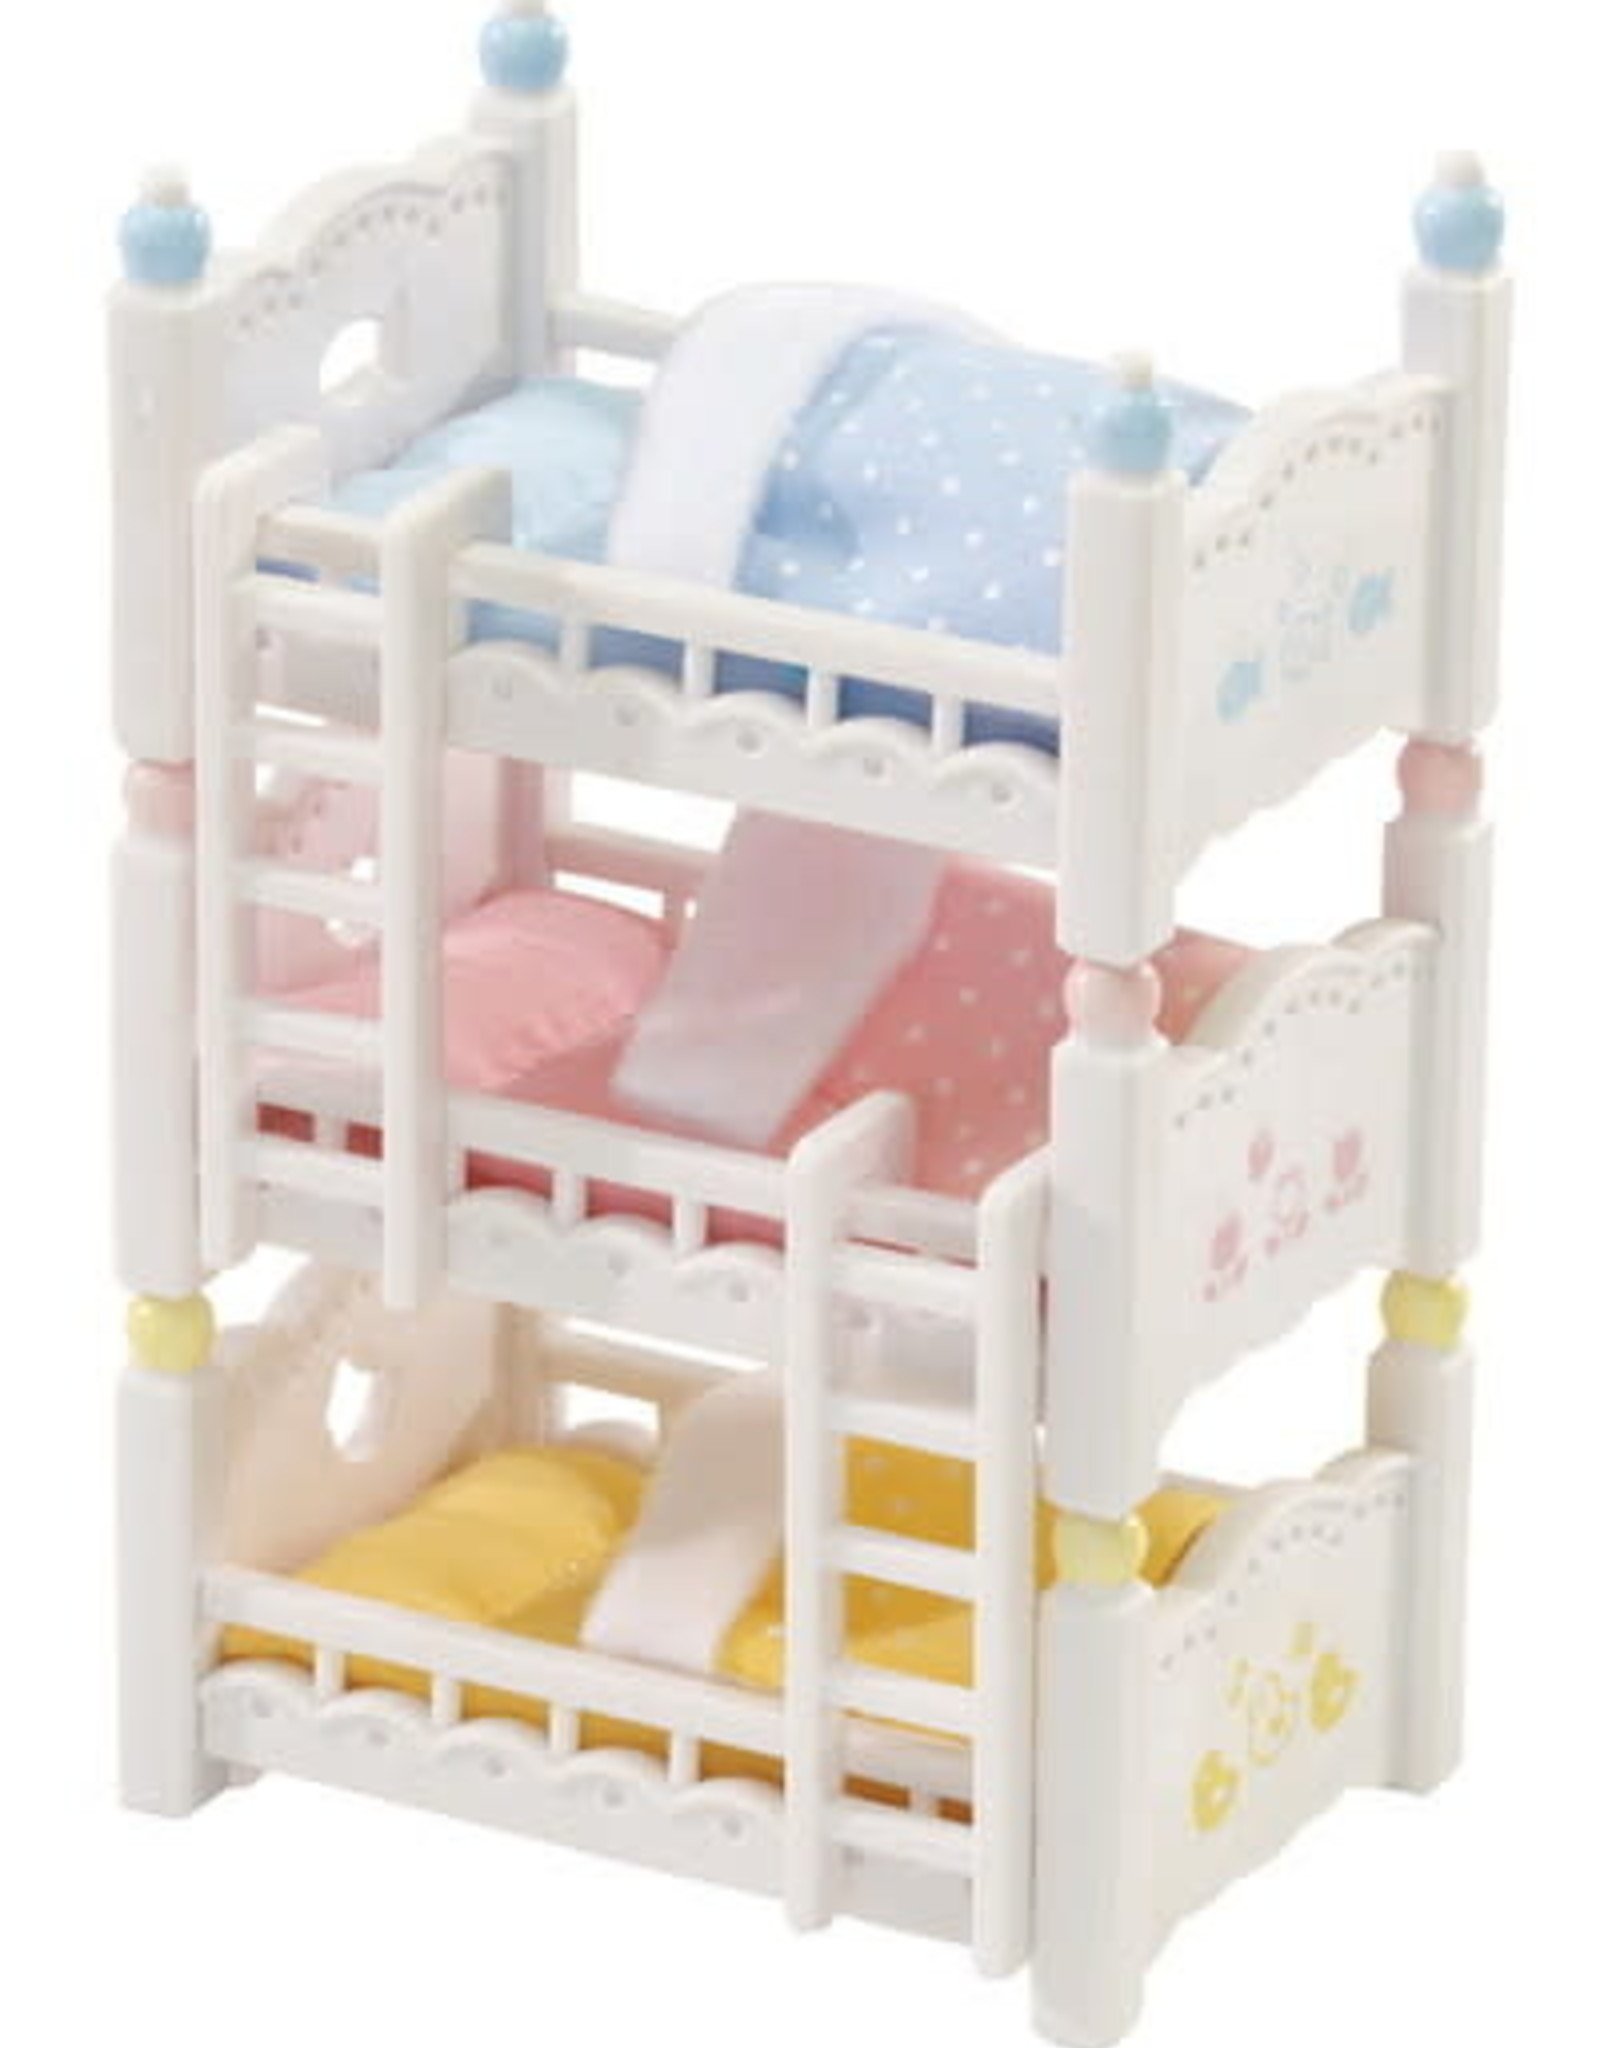 Calico Critters CC Triple Baby Bunk Beds